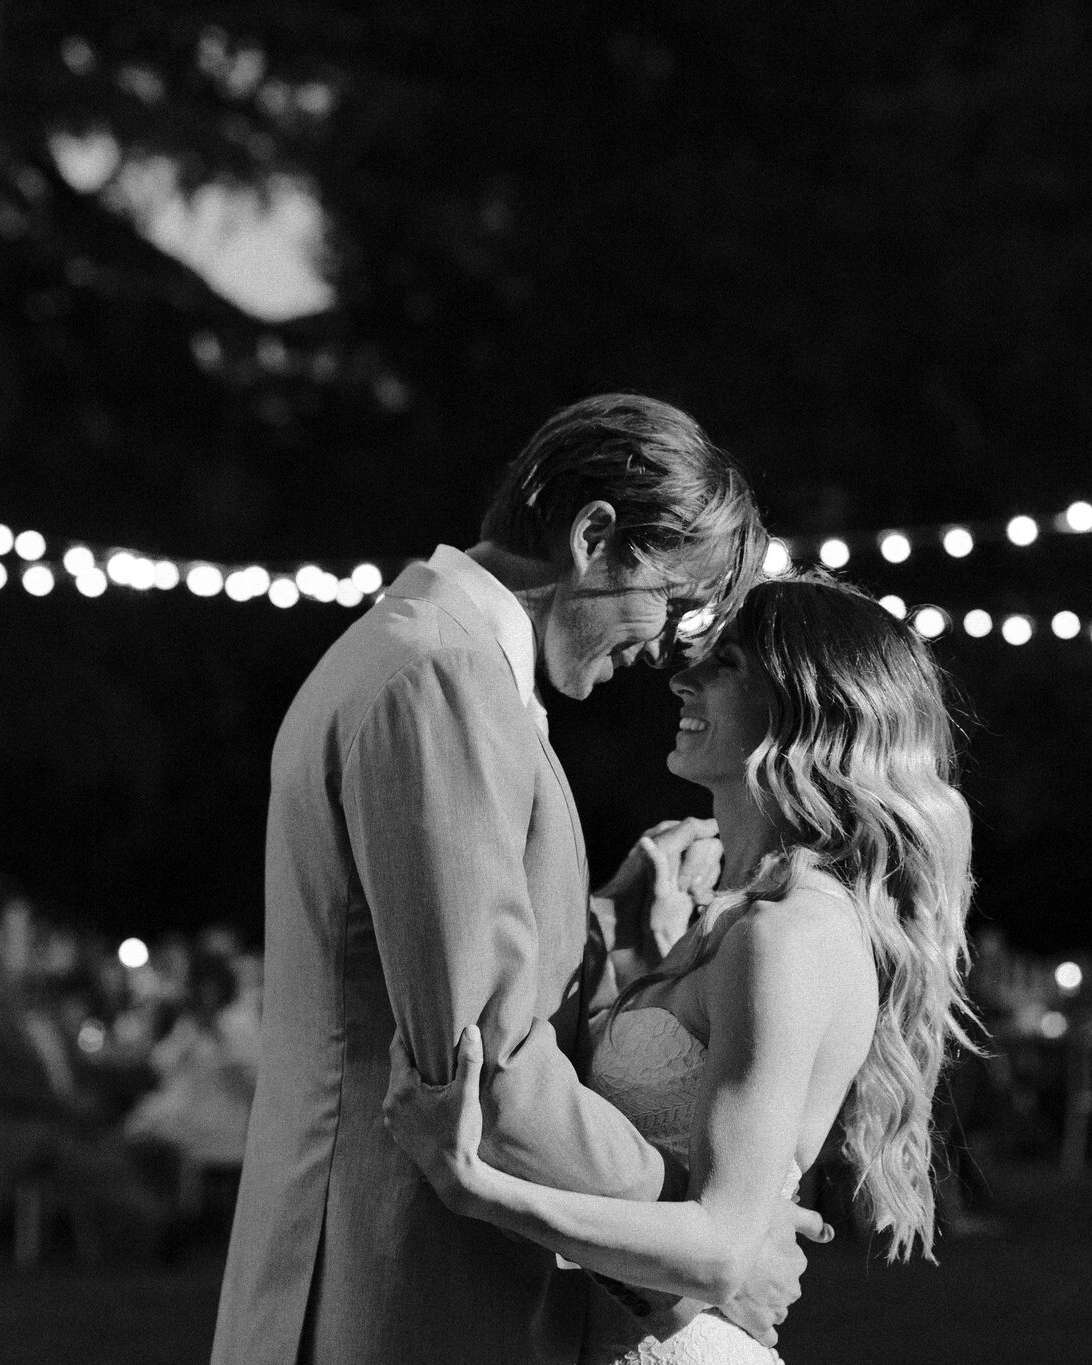 Tenley molzahn taylor leopold wedding first dance black and white